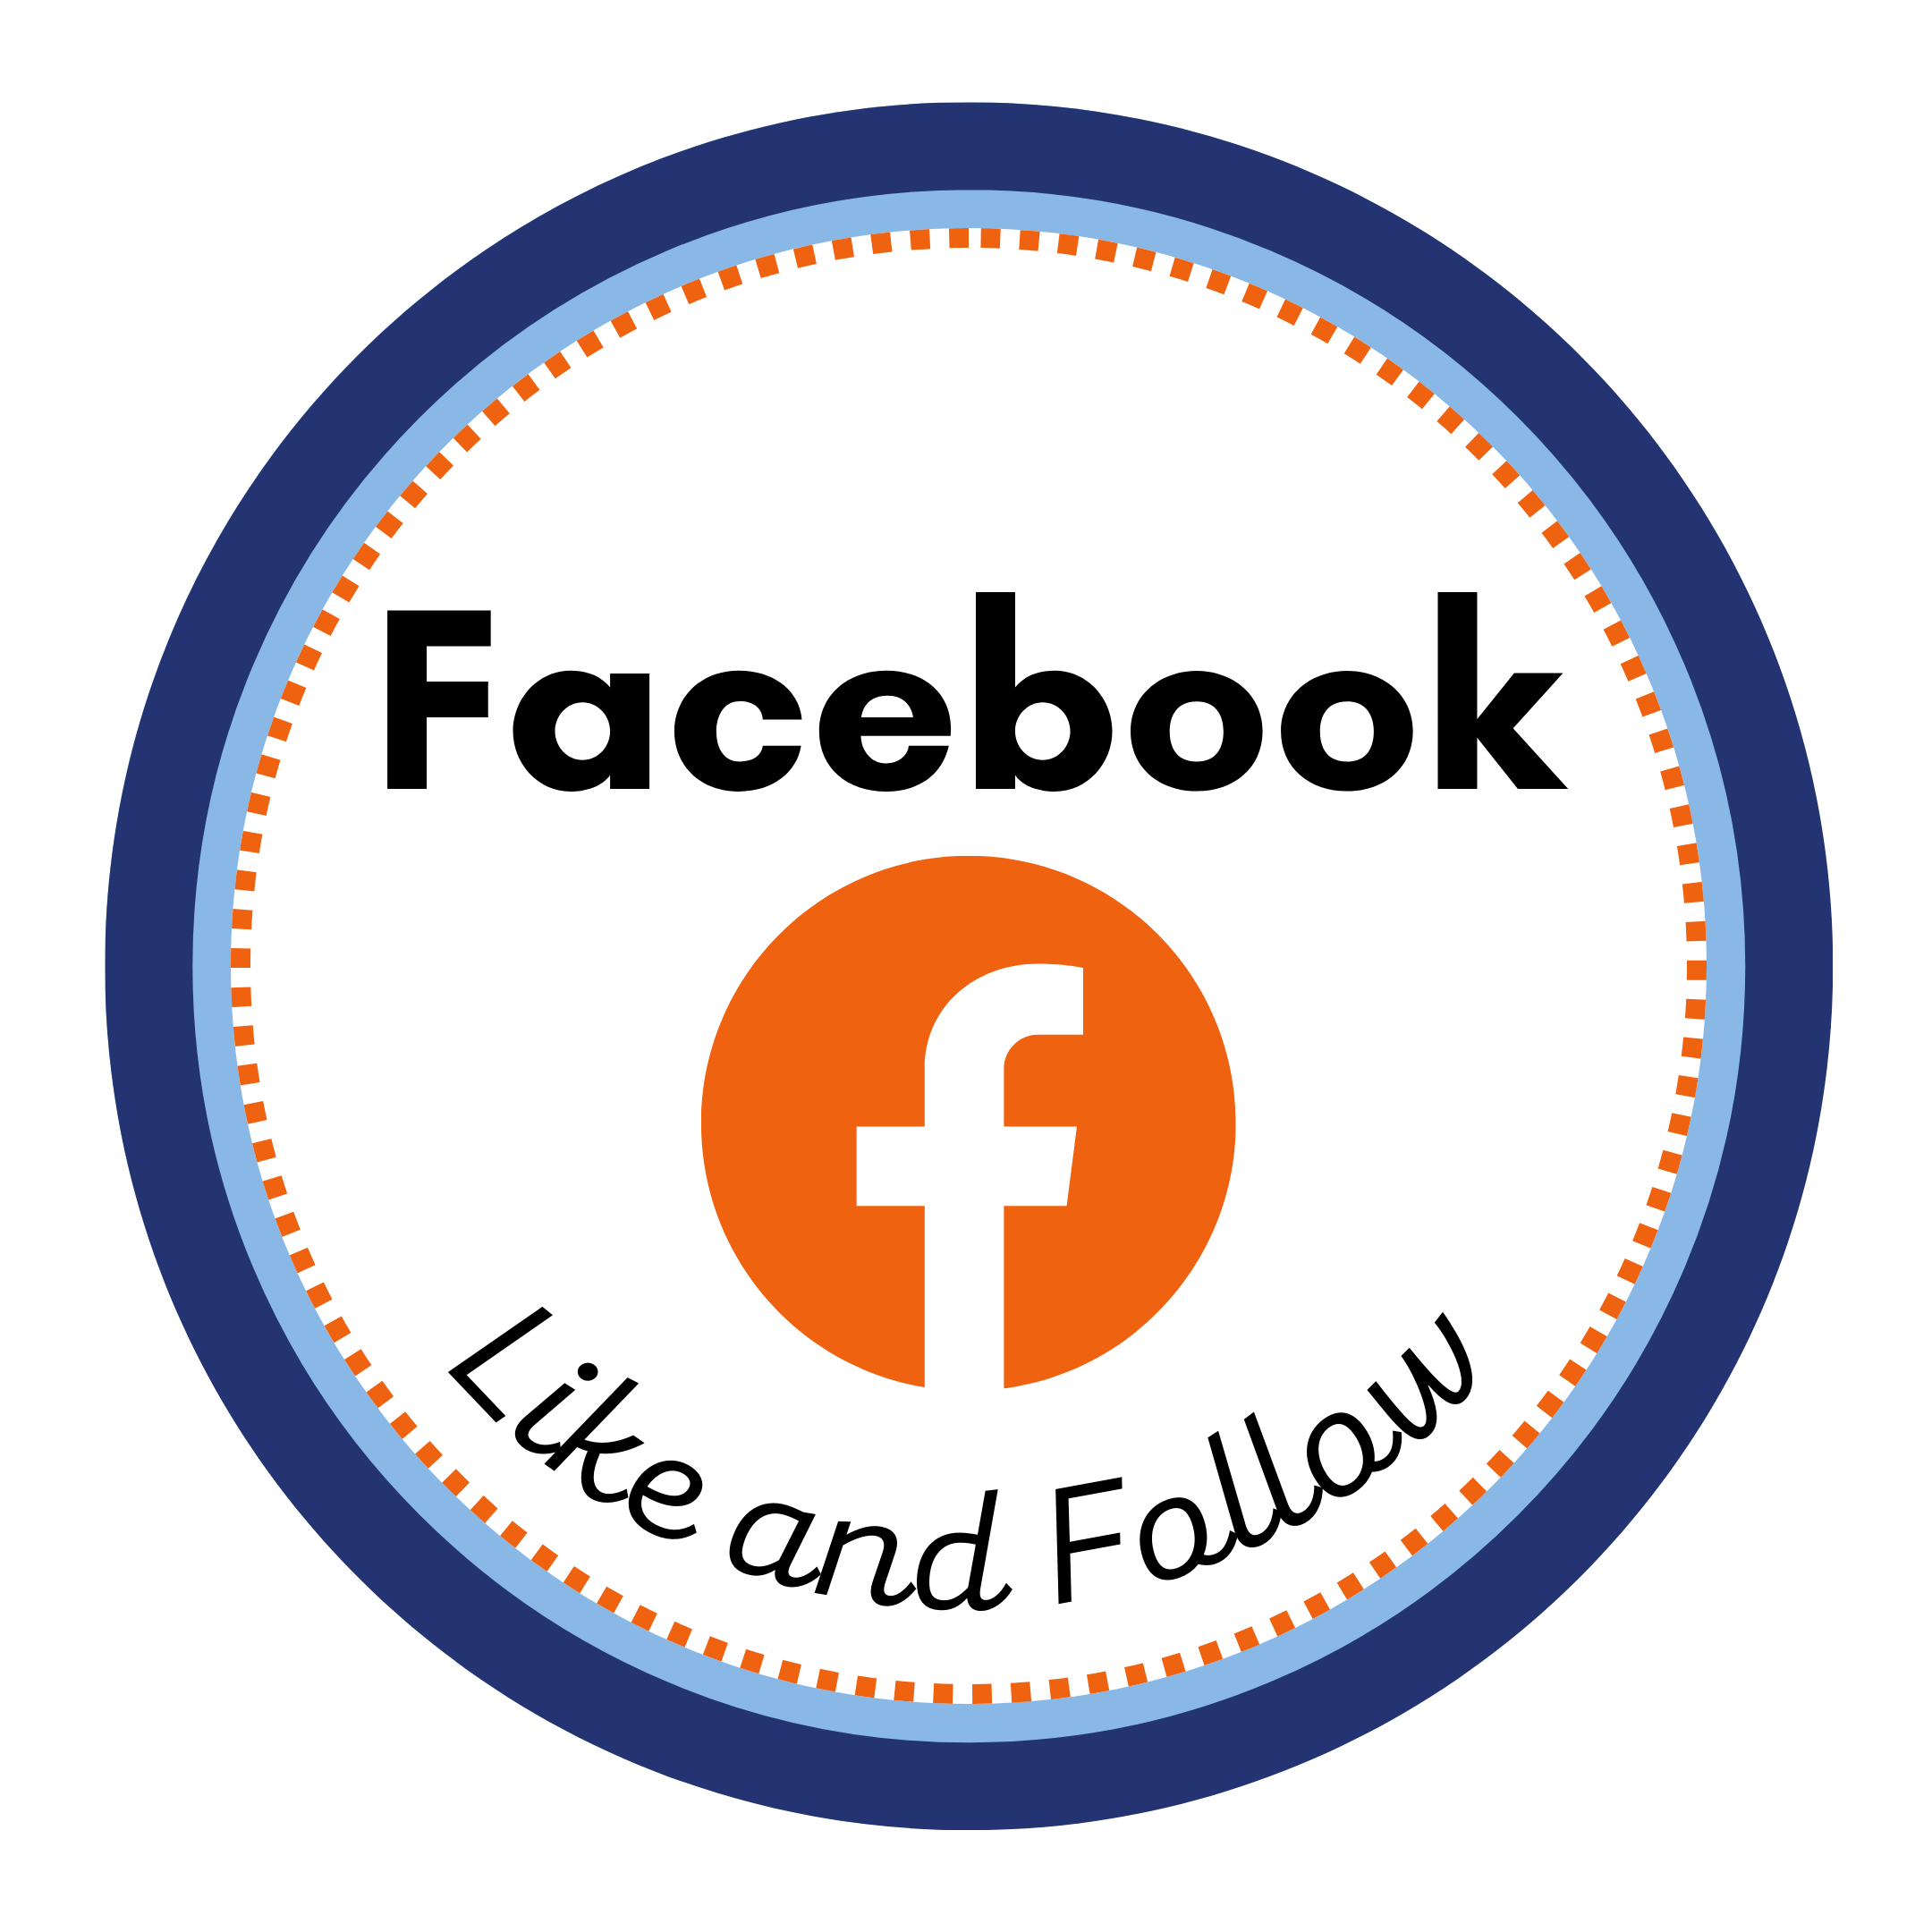 Facebook link - stay informed by liking and most importantly following our page